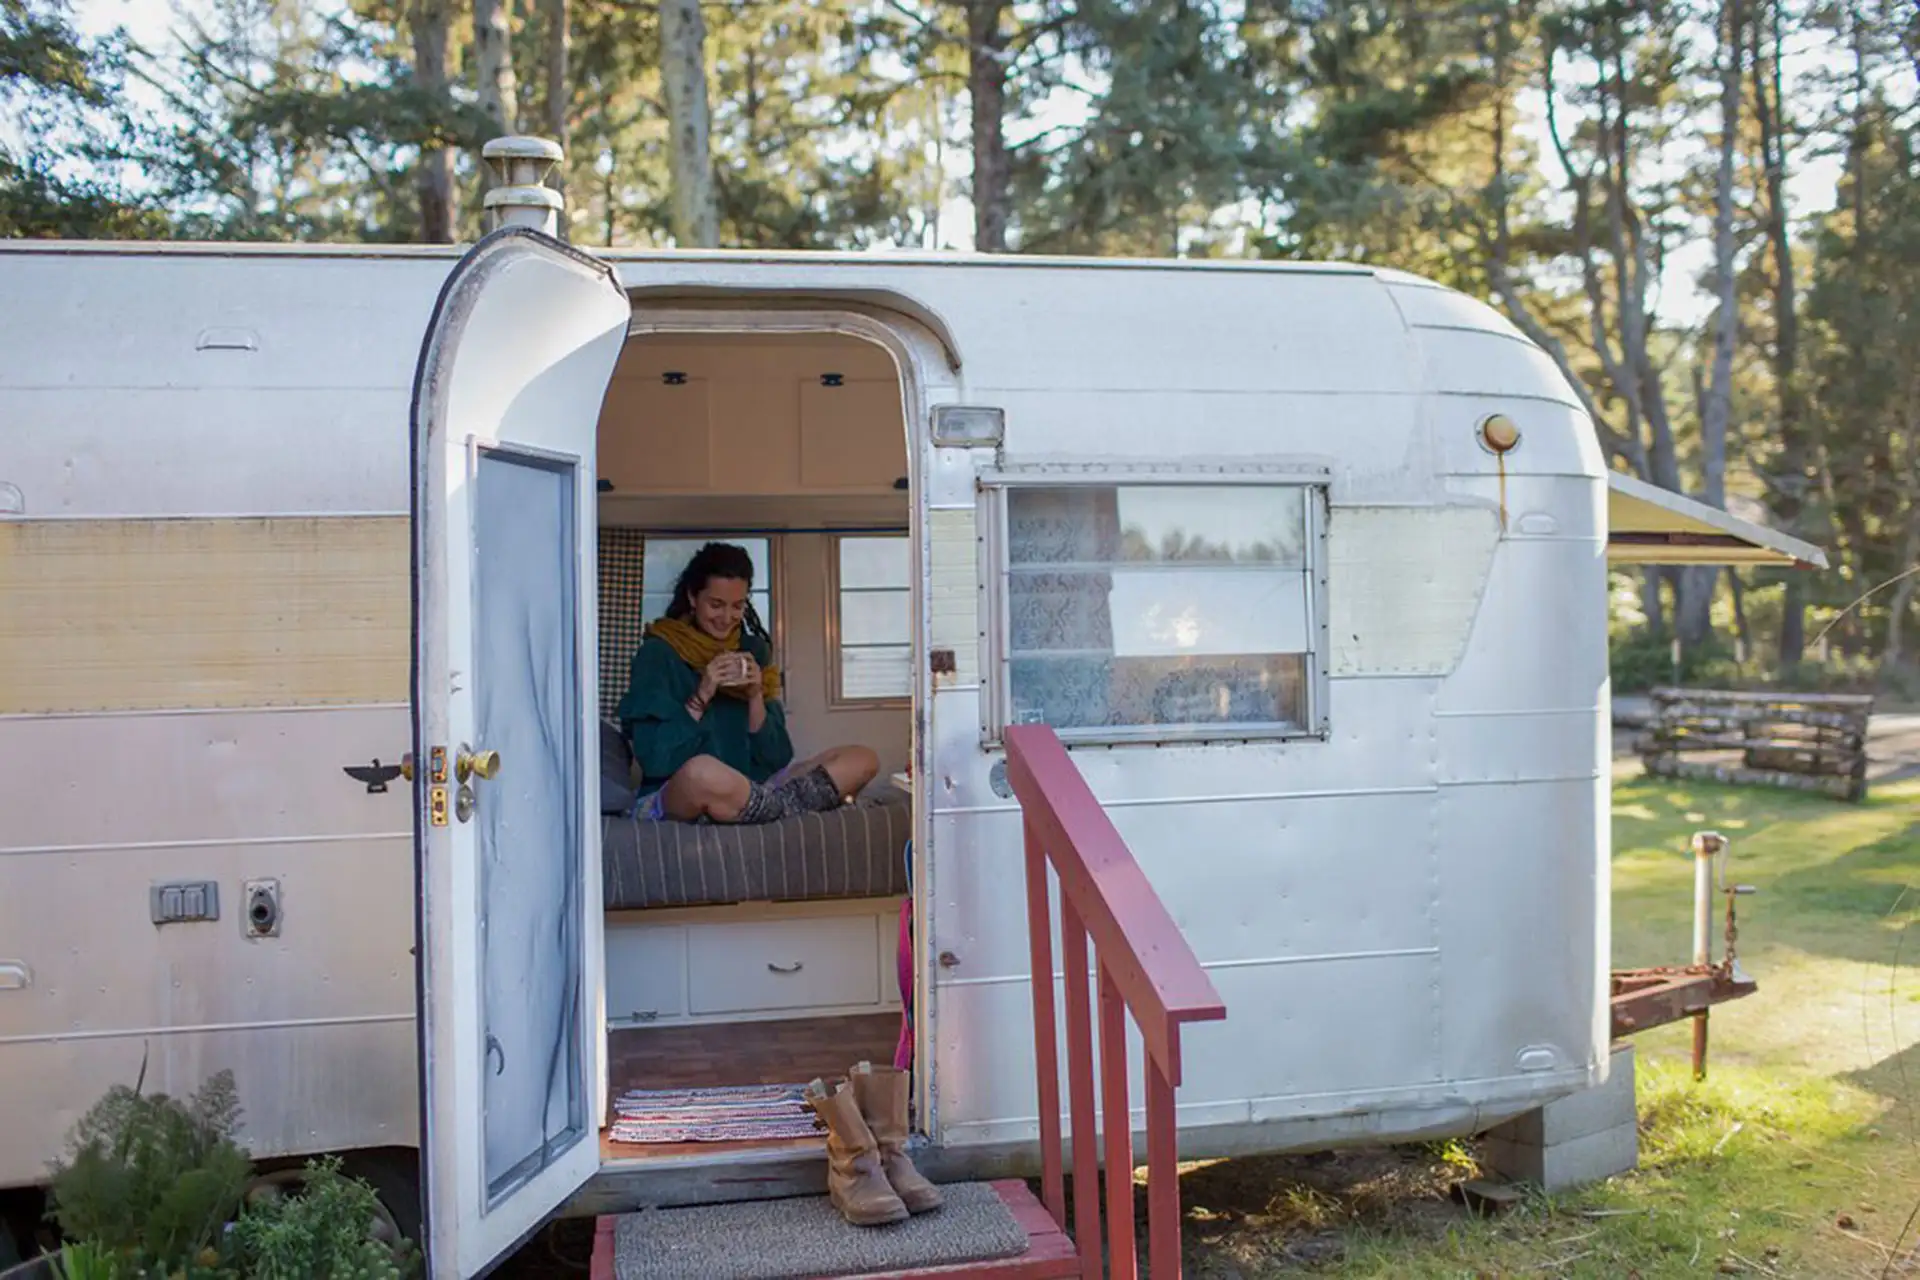 Teenage Girl in Airstream Trailer at Sou’wester Historic Lodge and Vintage Travel Trailer Resort in Seaview, Washington